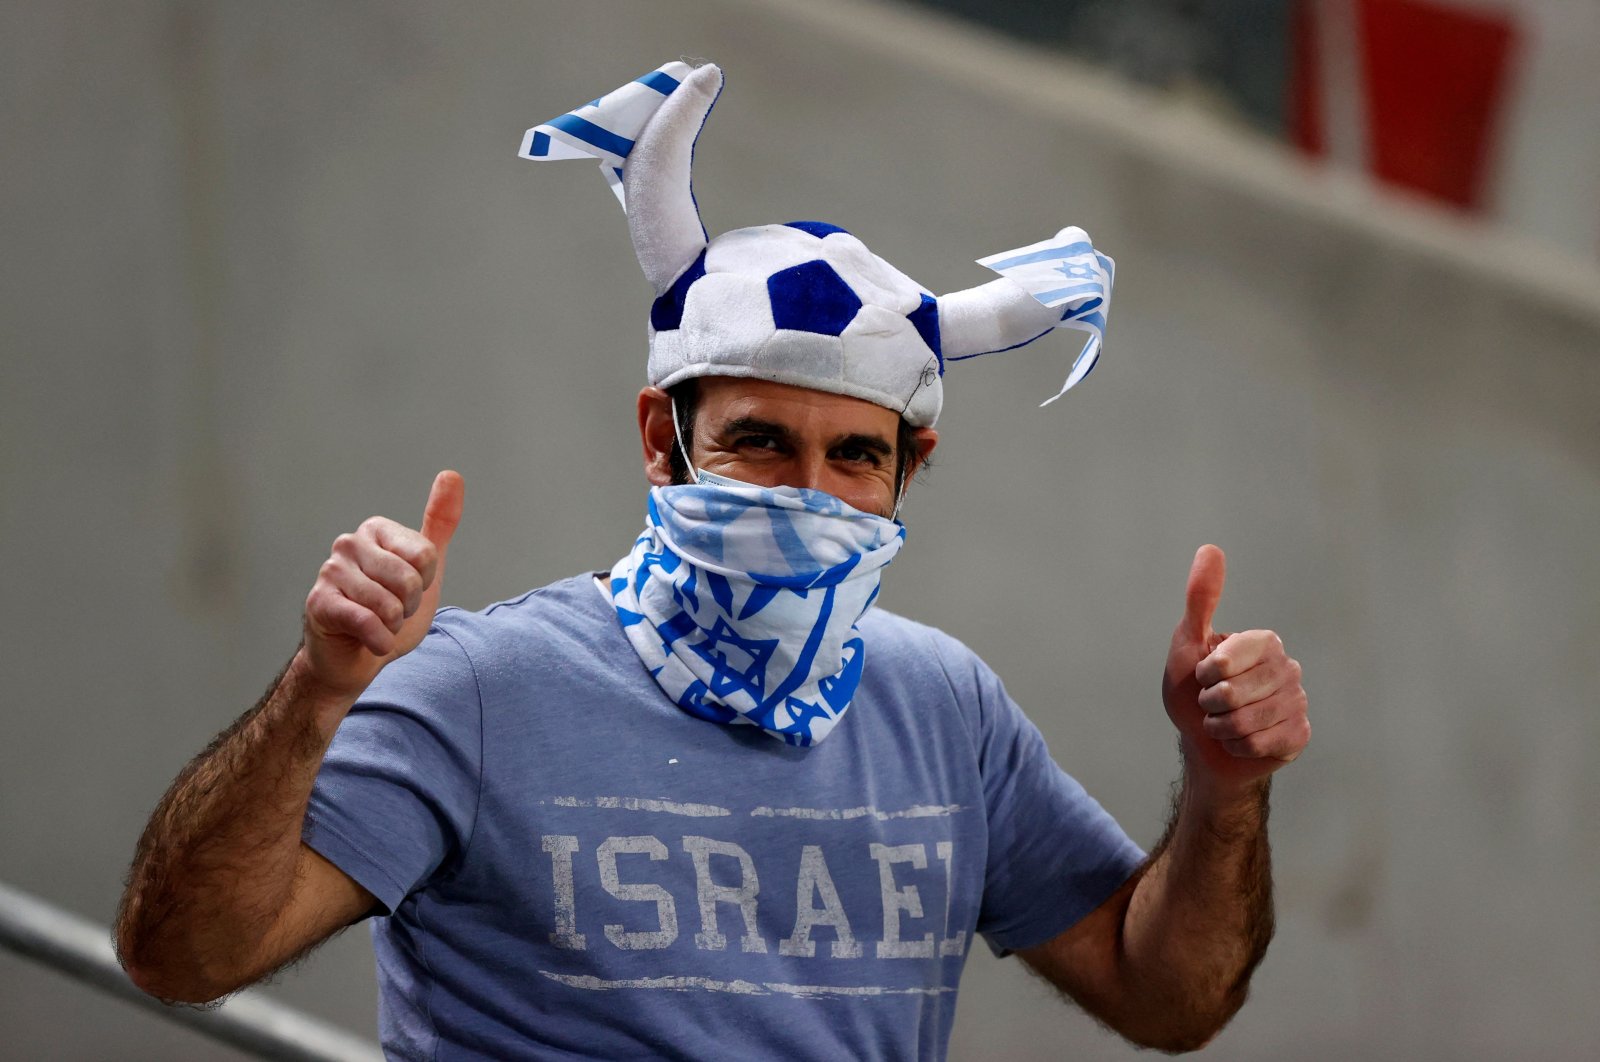 An Israeli fan gestures during the 2022 FIFA World Cup qualifier against Denmark, Tel Aviv, Israel, March 25, 2021. (AFP Photo)